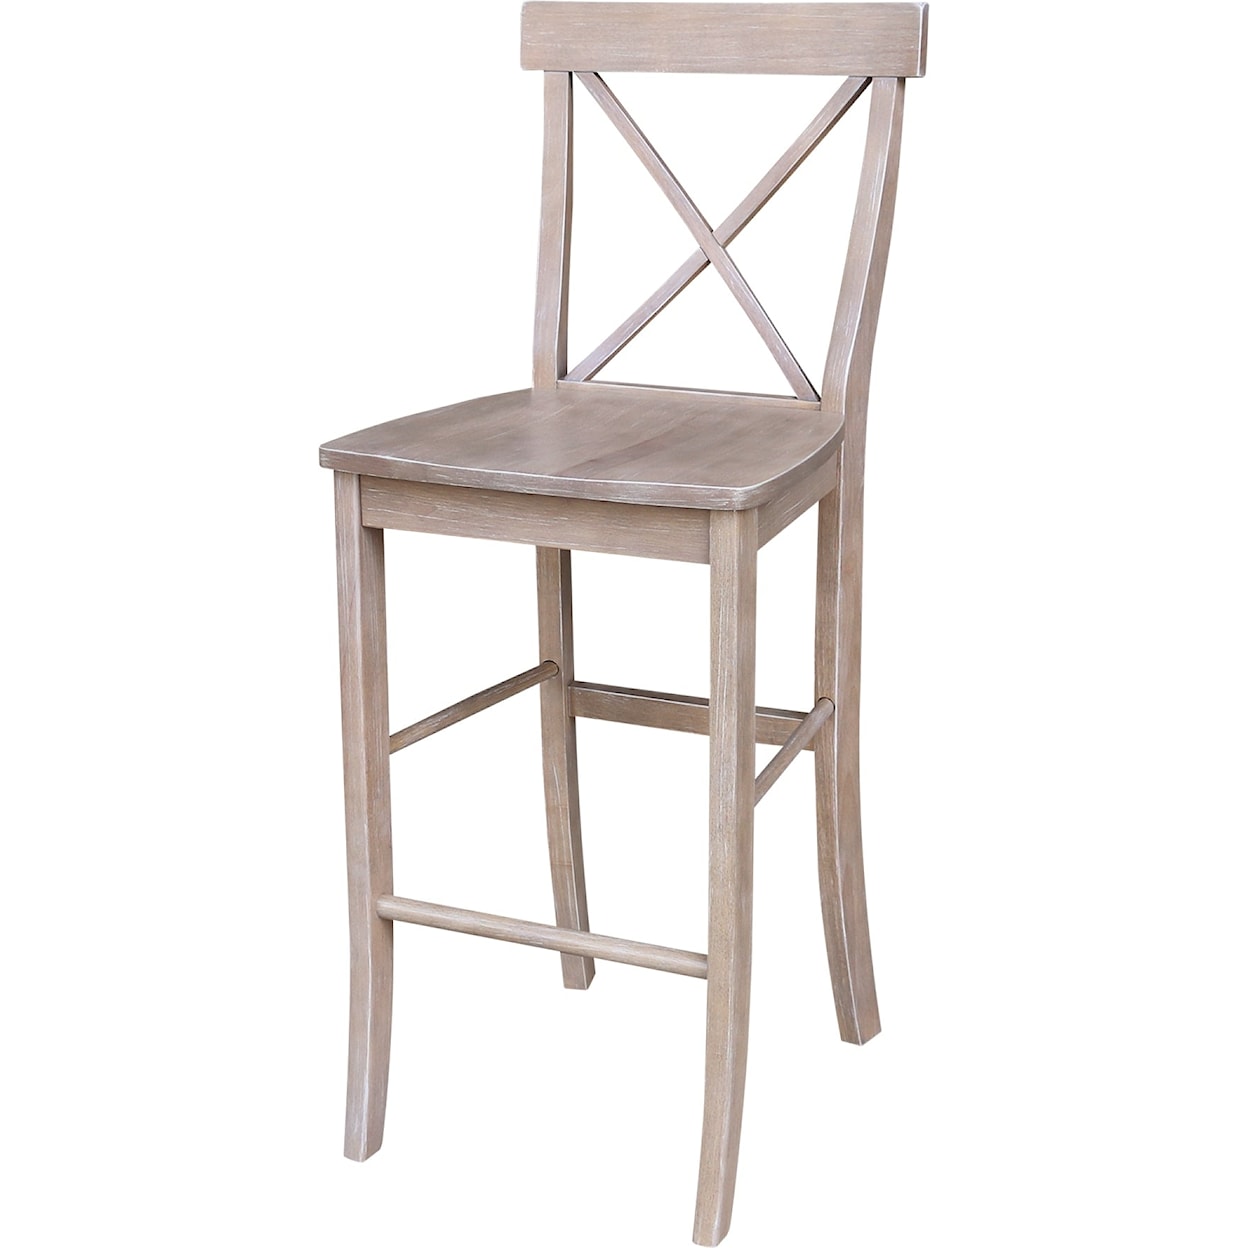 John Thomas Dining Essentials X-Back Stool in Taupe Gray